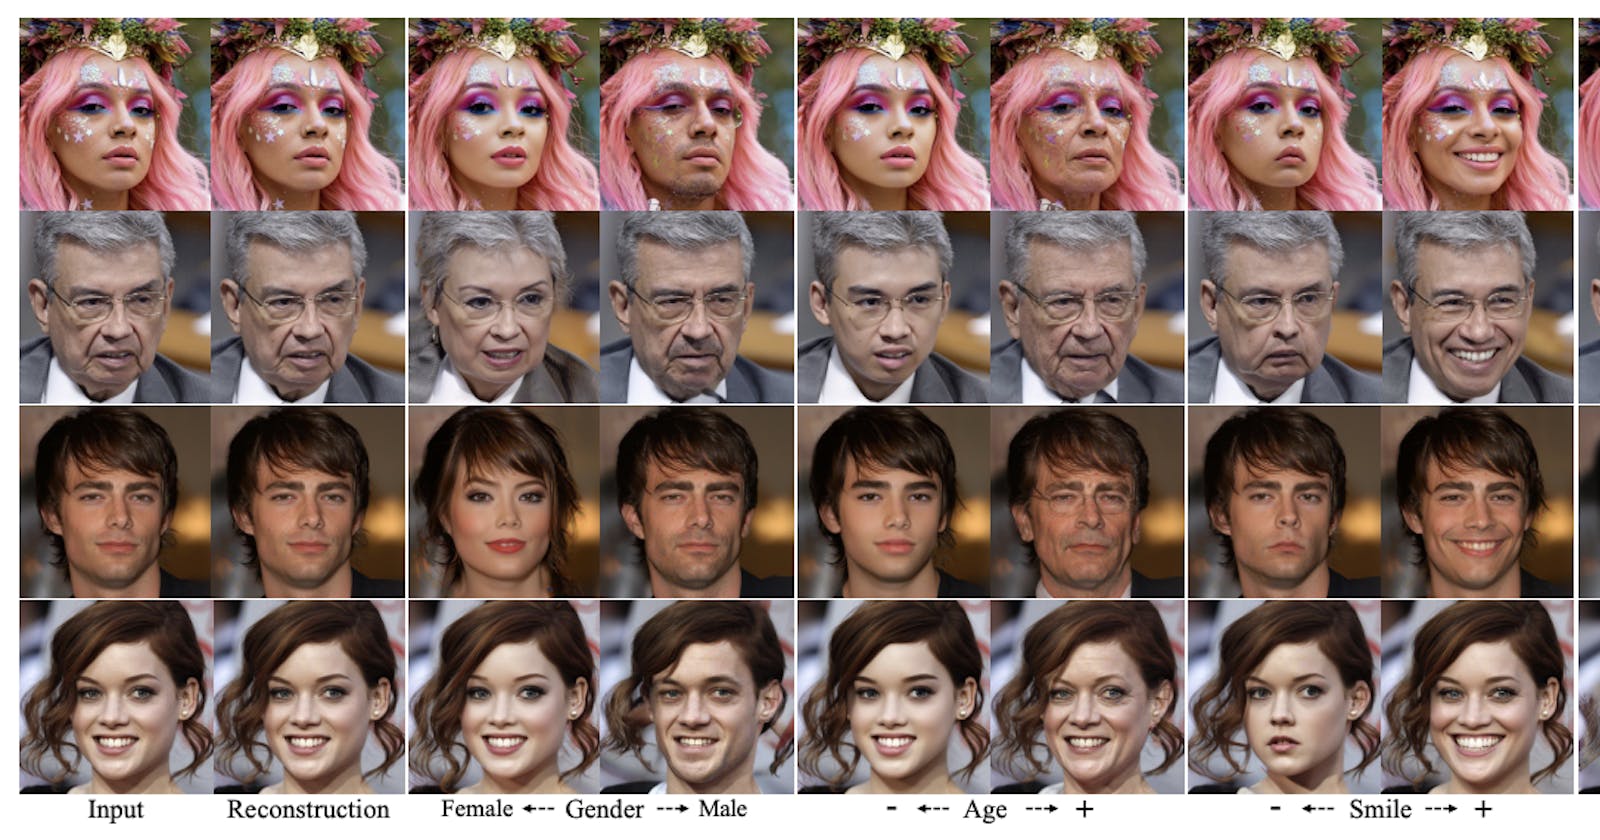 DiffAE: How to use AI to make your friends look bald, happy, young, blond, old - you name it!